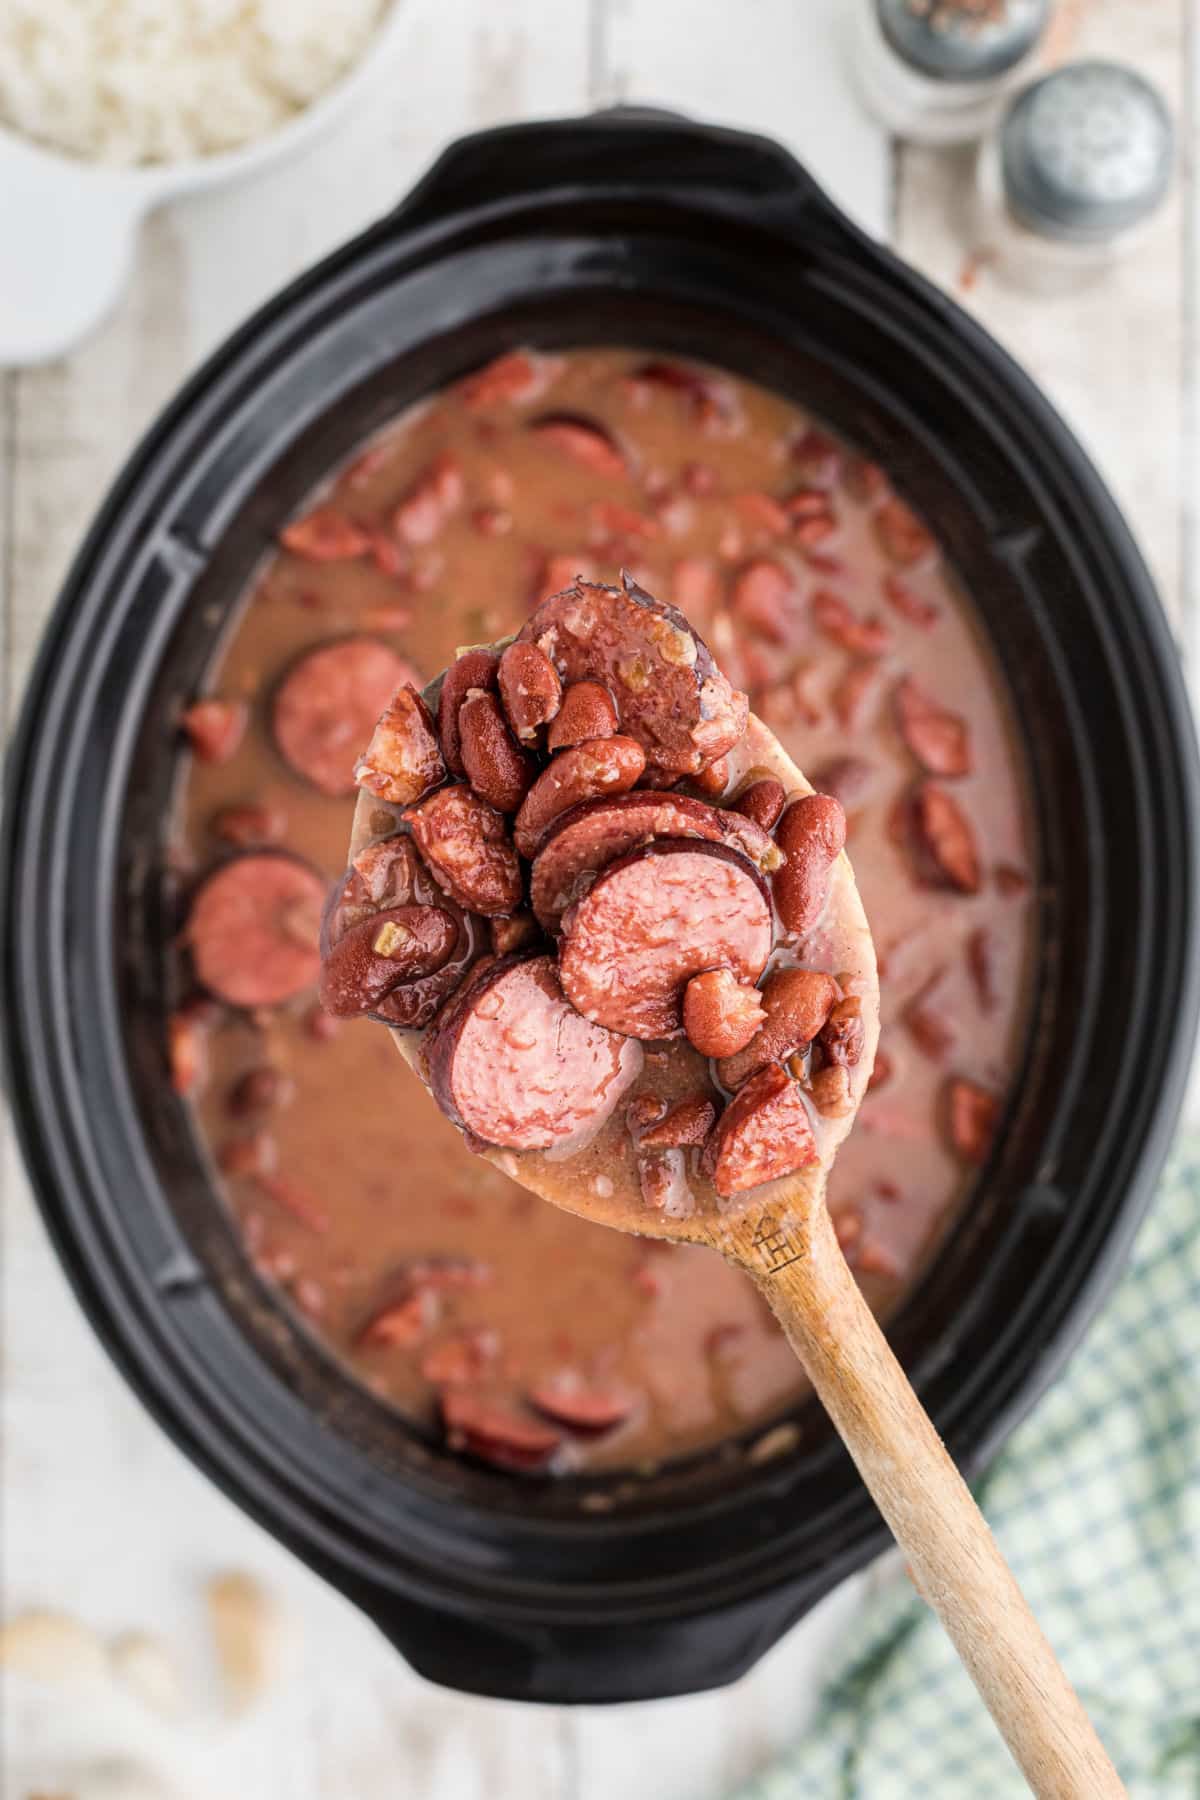 A spoon lifting some red beans out of a slow cooker.